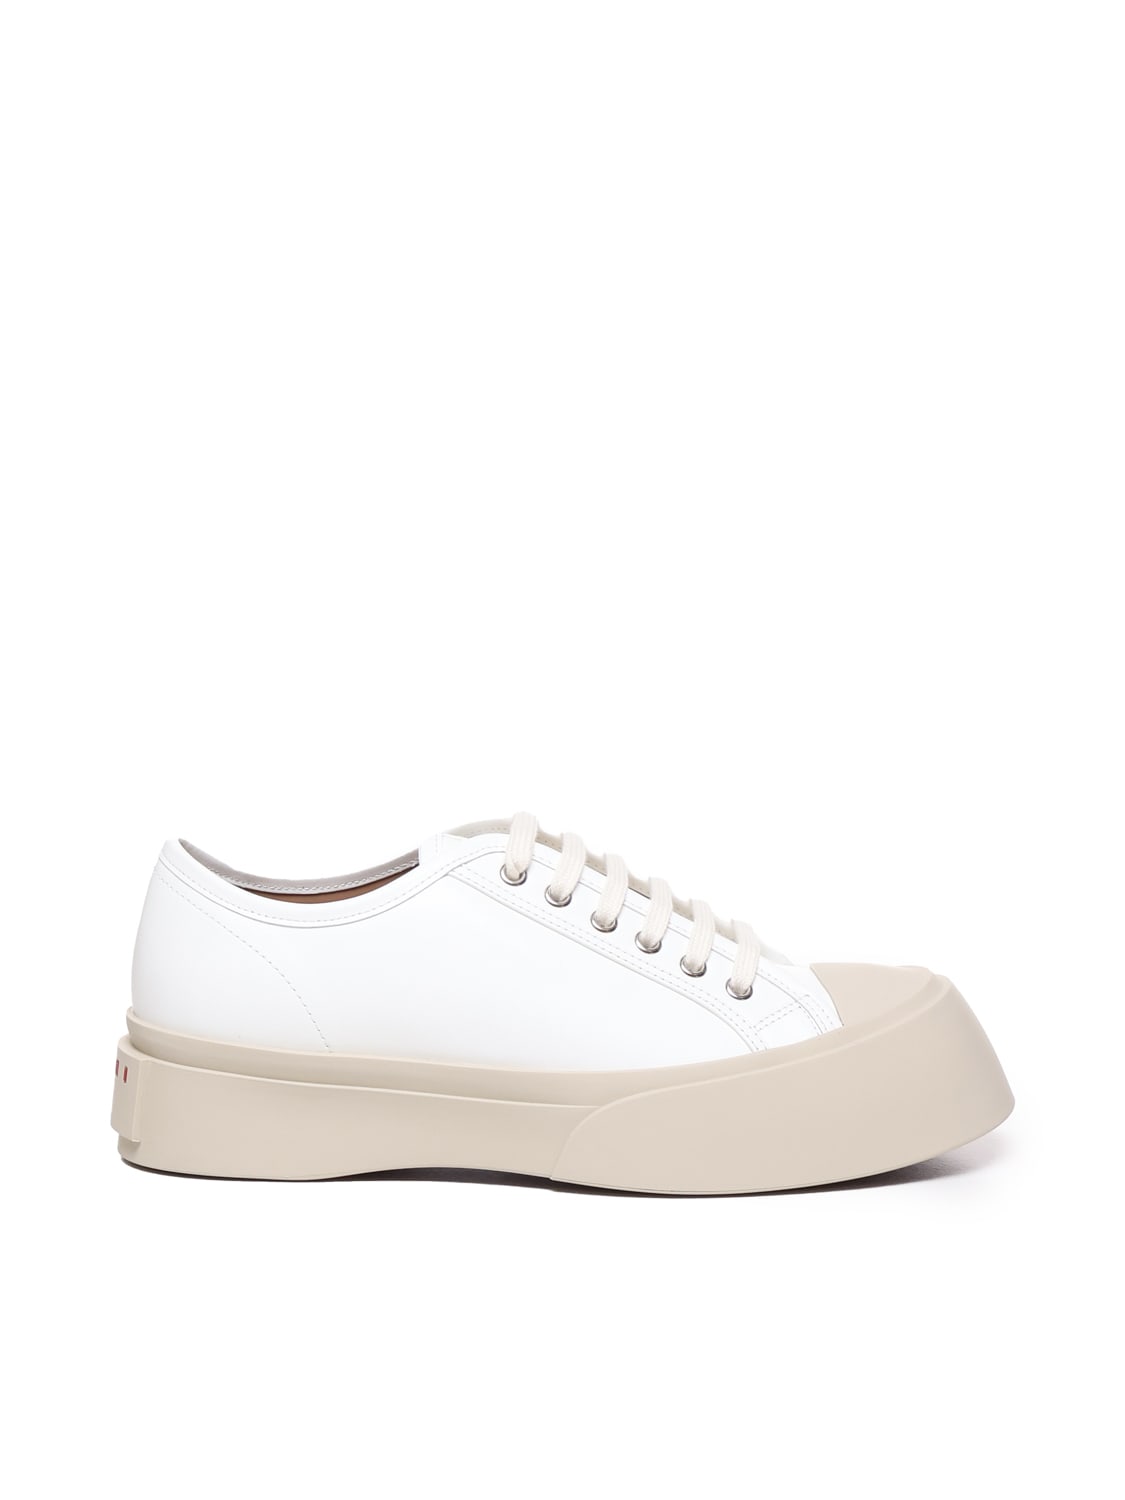 Pablo Sneaker In Nappa Leather